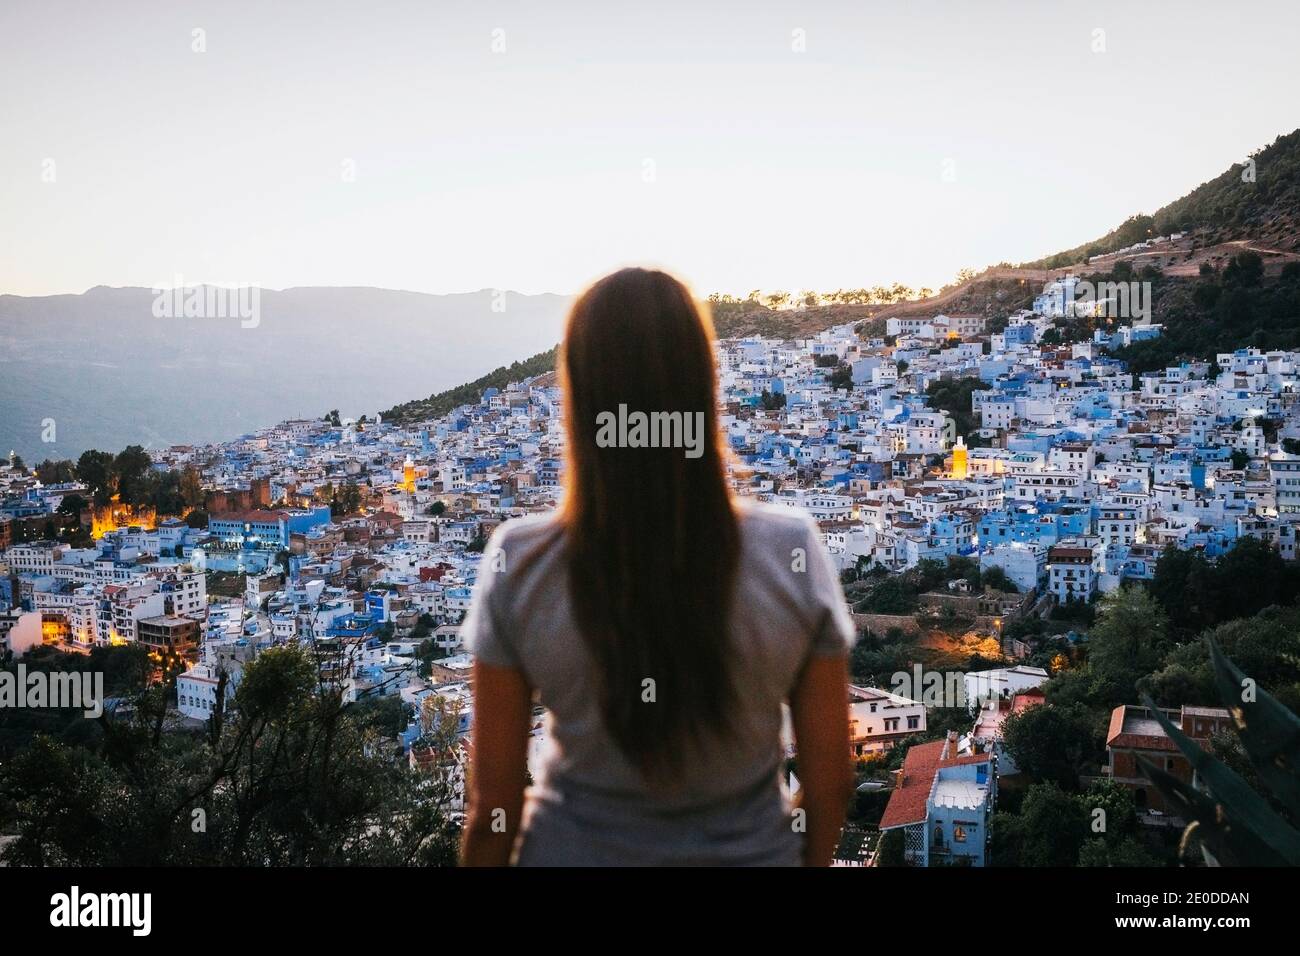 Back view of unrecognizable young female tourist admiring picturesque cityscape with cozy typical white and blue houses located on hill slope against Stock Photo